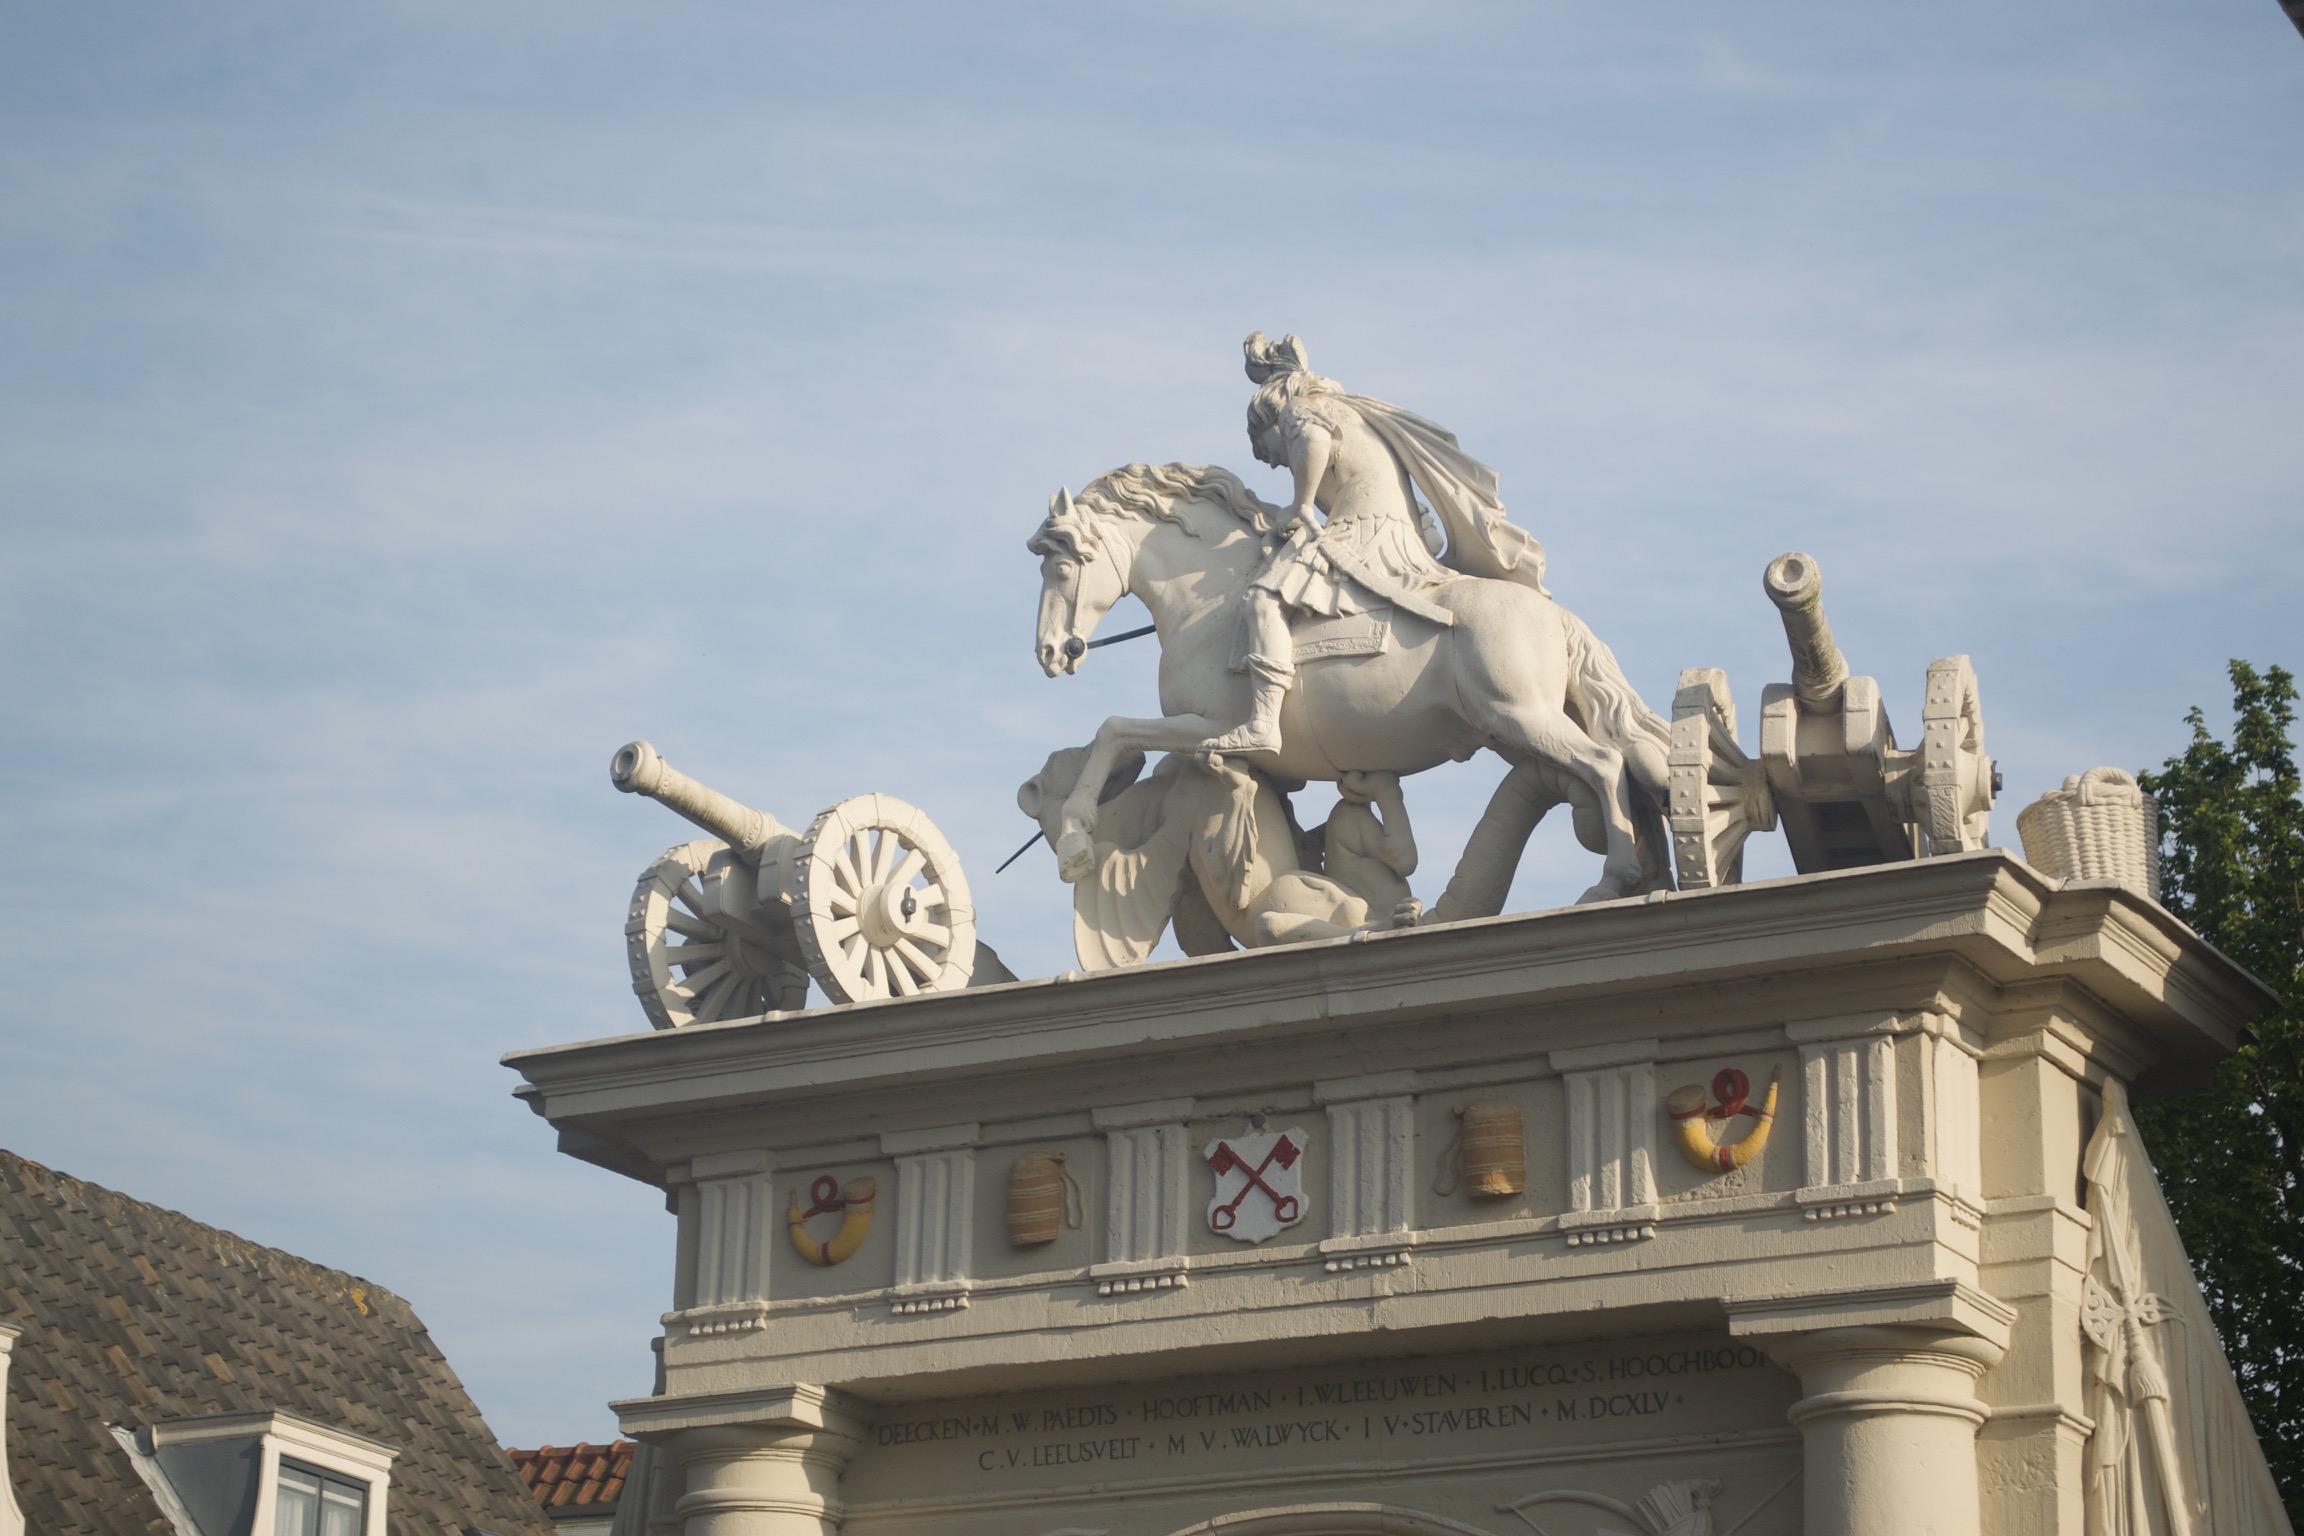 Statues of two cannons and a horse and rider fighting a griffin on top of an archway.